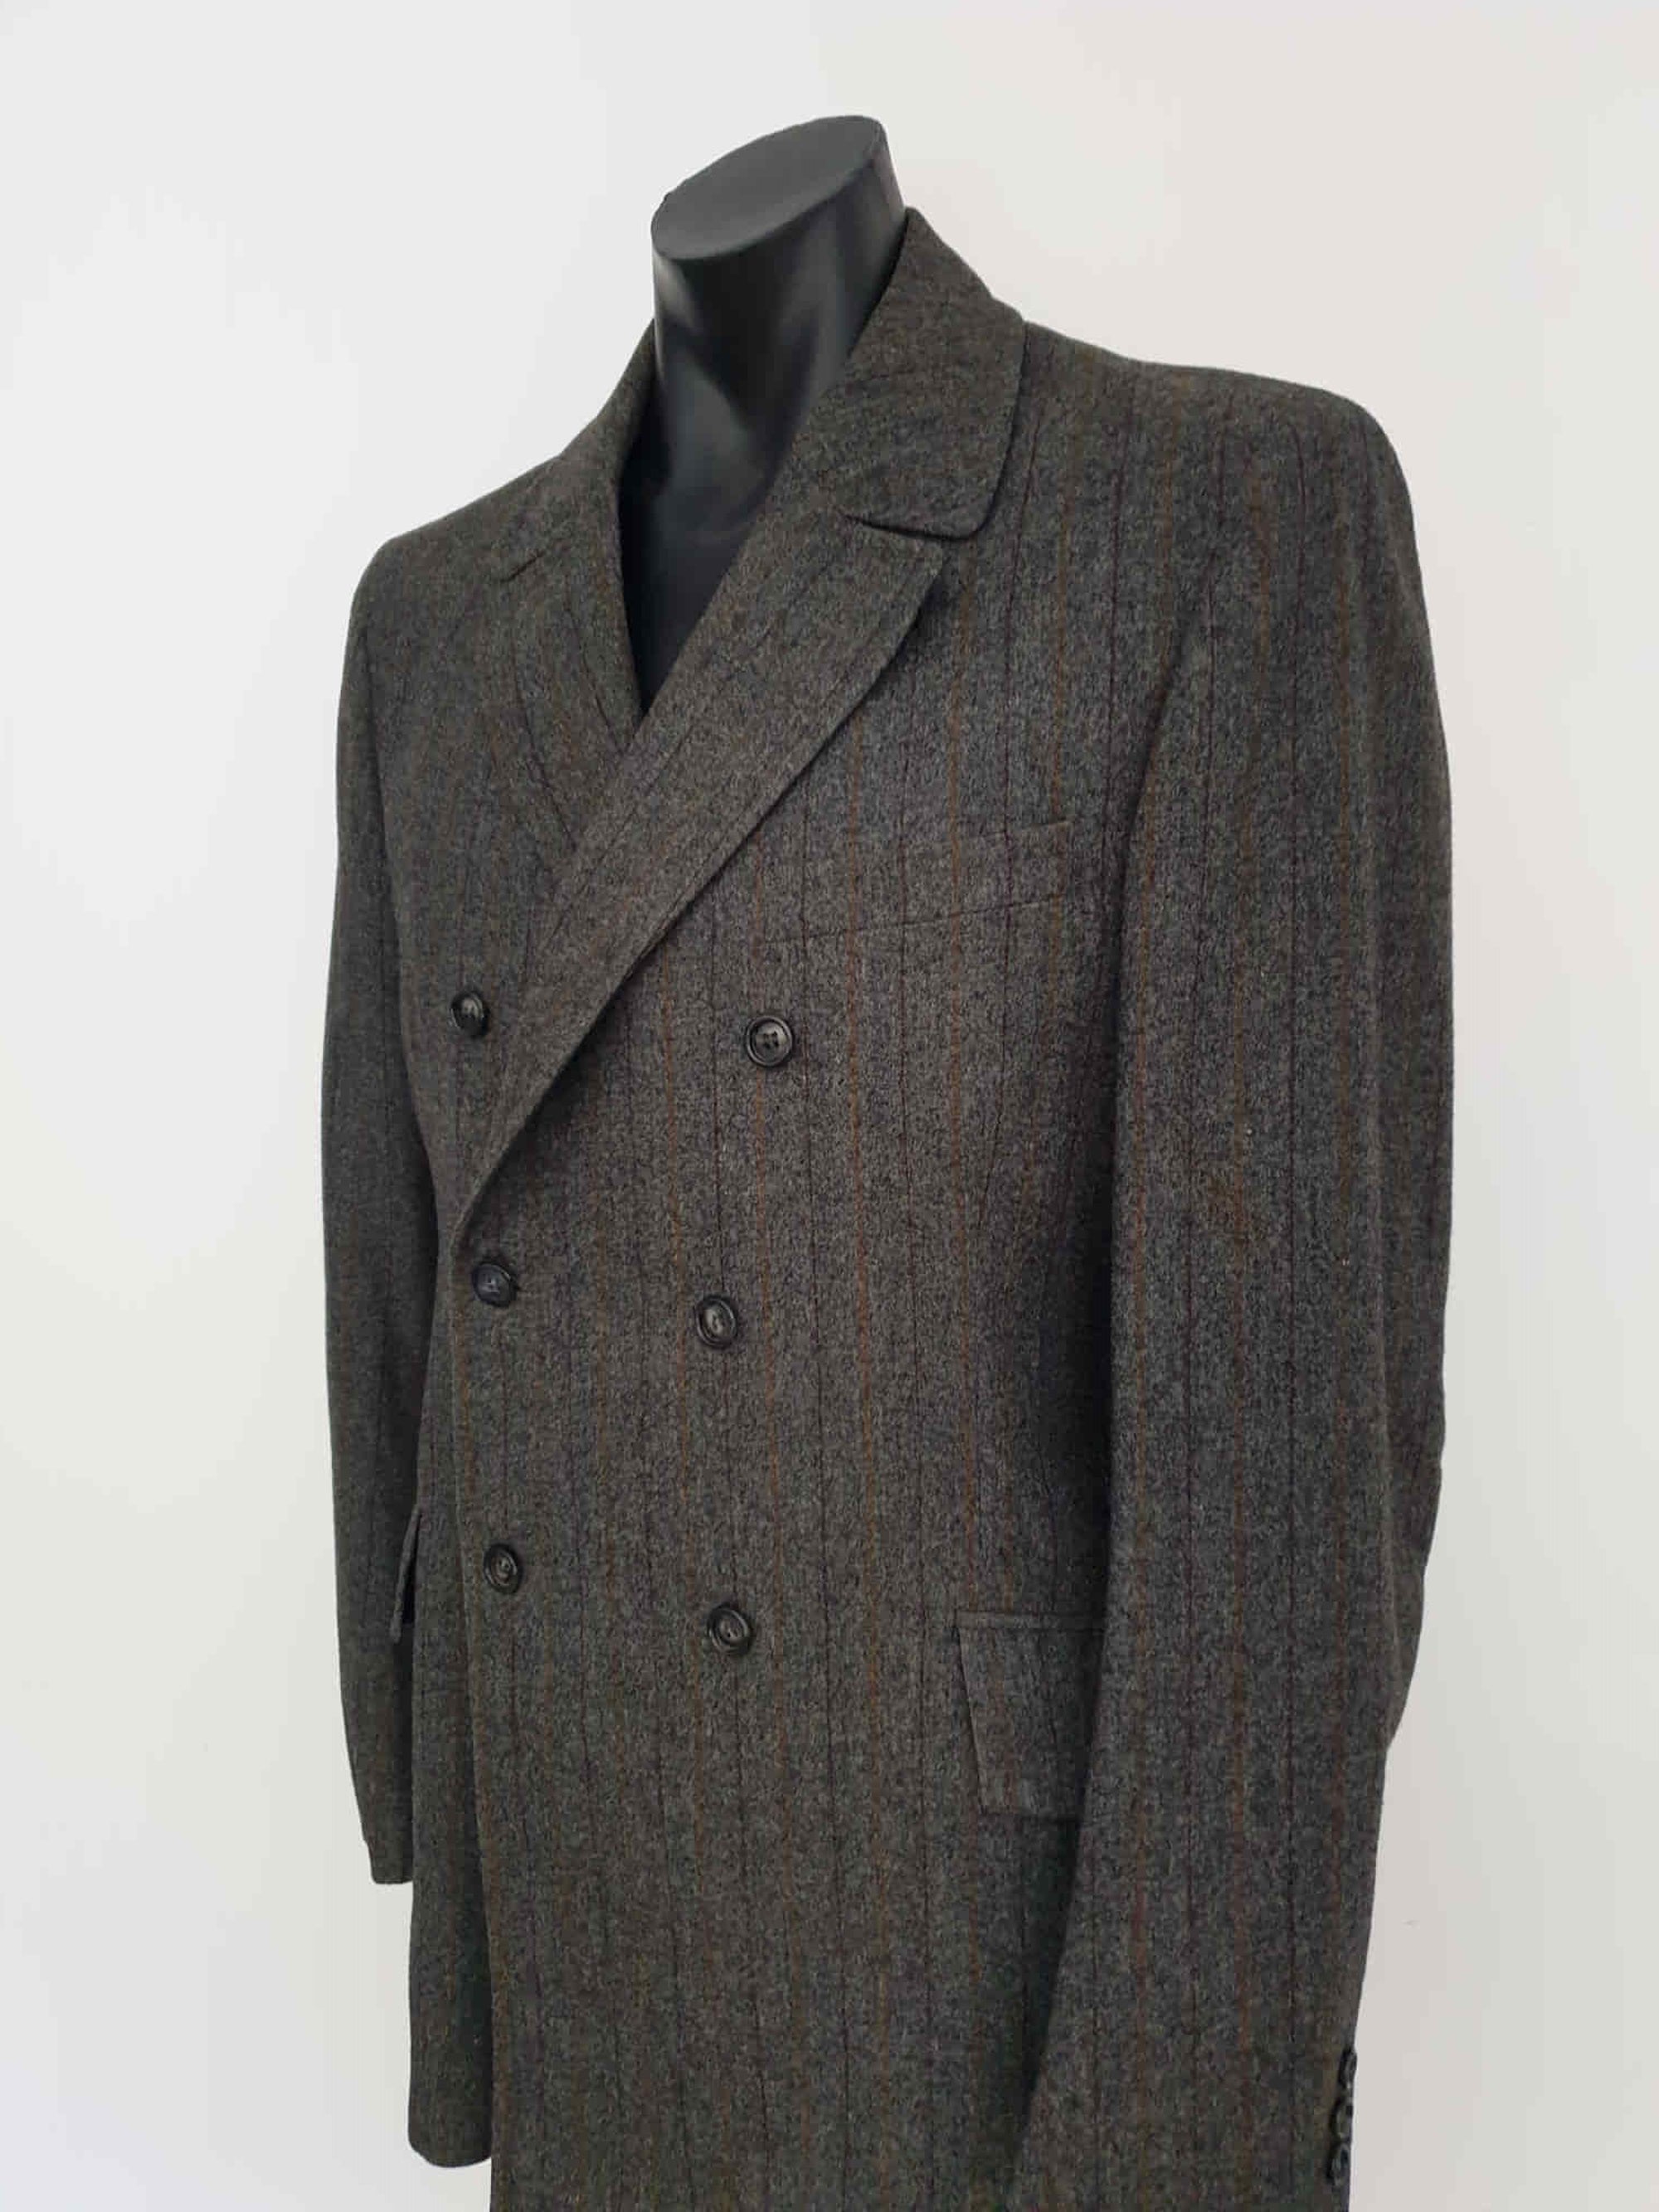 1960s vintage grey double breasted jacket by frieze - Bud Tingwell estate size 40L